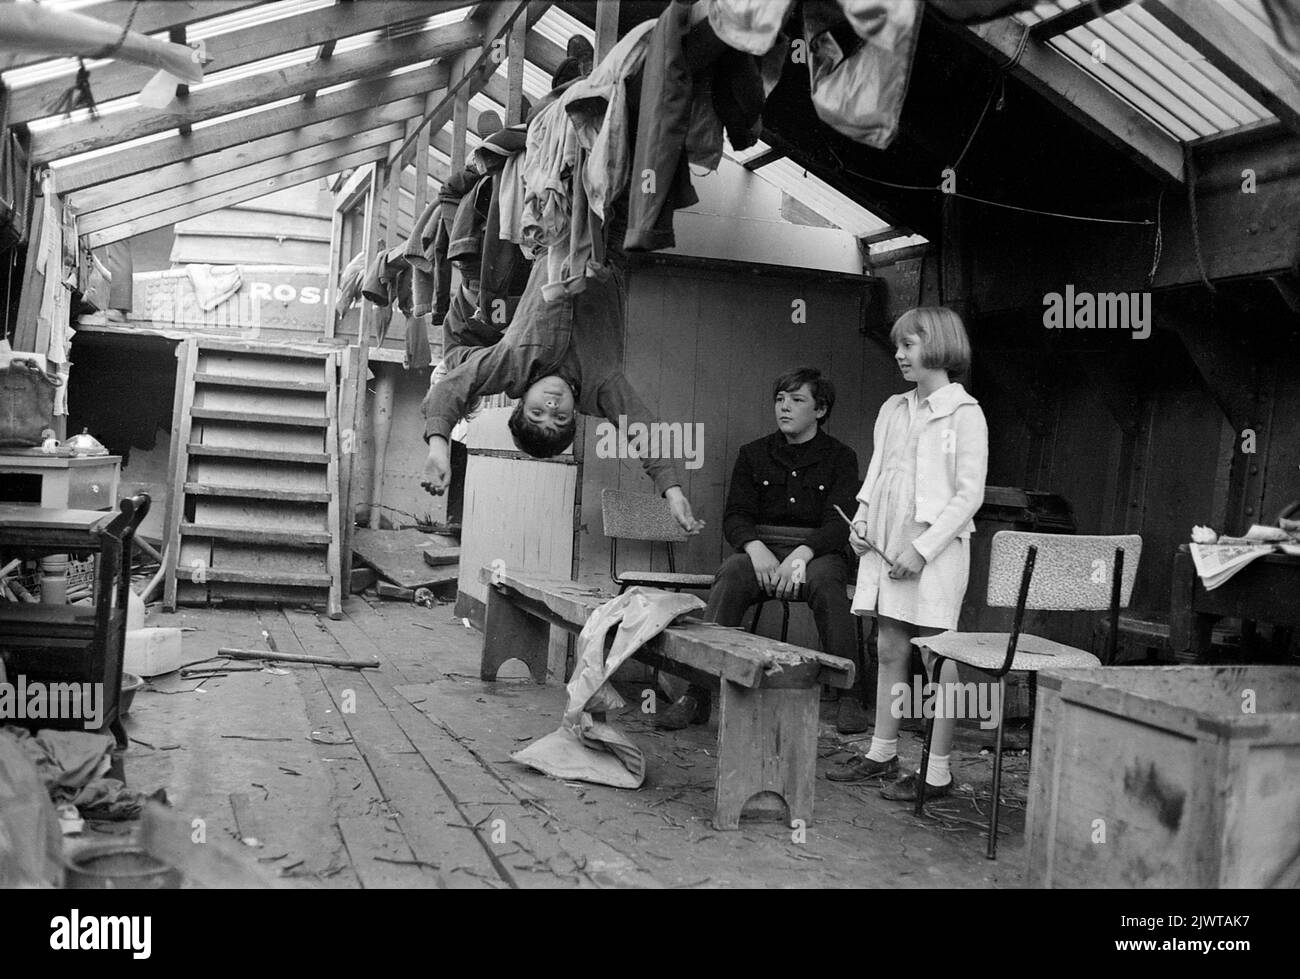 London, England, circa 1967. A group of children of The Pirate Club aboard ‘Rosedale’, a disused barge which served as their clubhouse. Two boys are dangling upside-down from a roof beam while another boy and girl look on. Used nails and other litter have been discarded on the deck of the barge, left from its restoration work. The Pirate Club, a children’s boating club was formed in 1966 at Gilbey’s Wharf on the Regent’s Canal near Camden, London. A number of small boats and canoes had been donated for the children’s use. Stock Photo